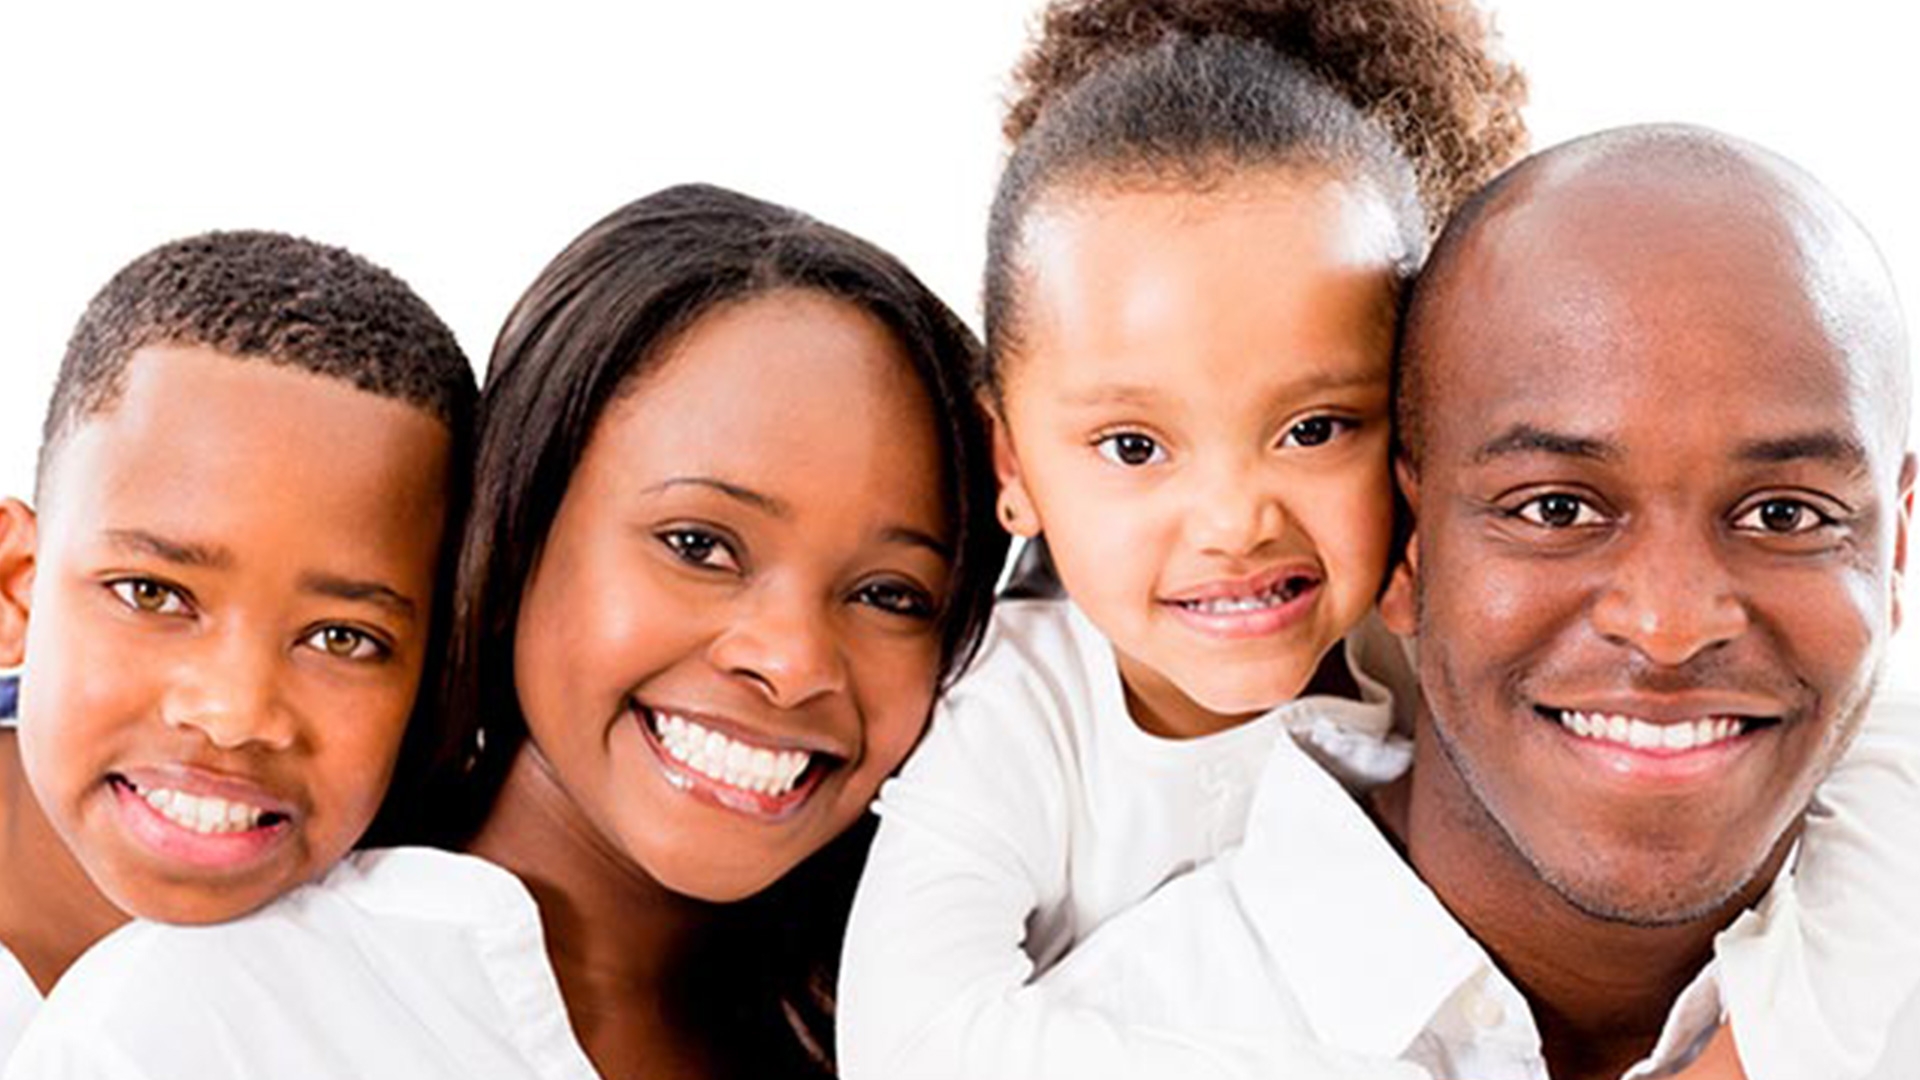 dental care for you and your family by best dentists in bethesda md